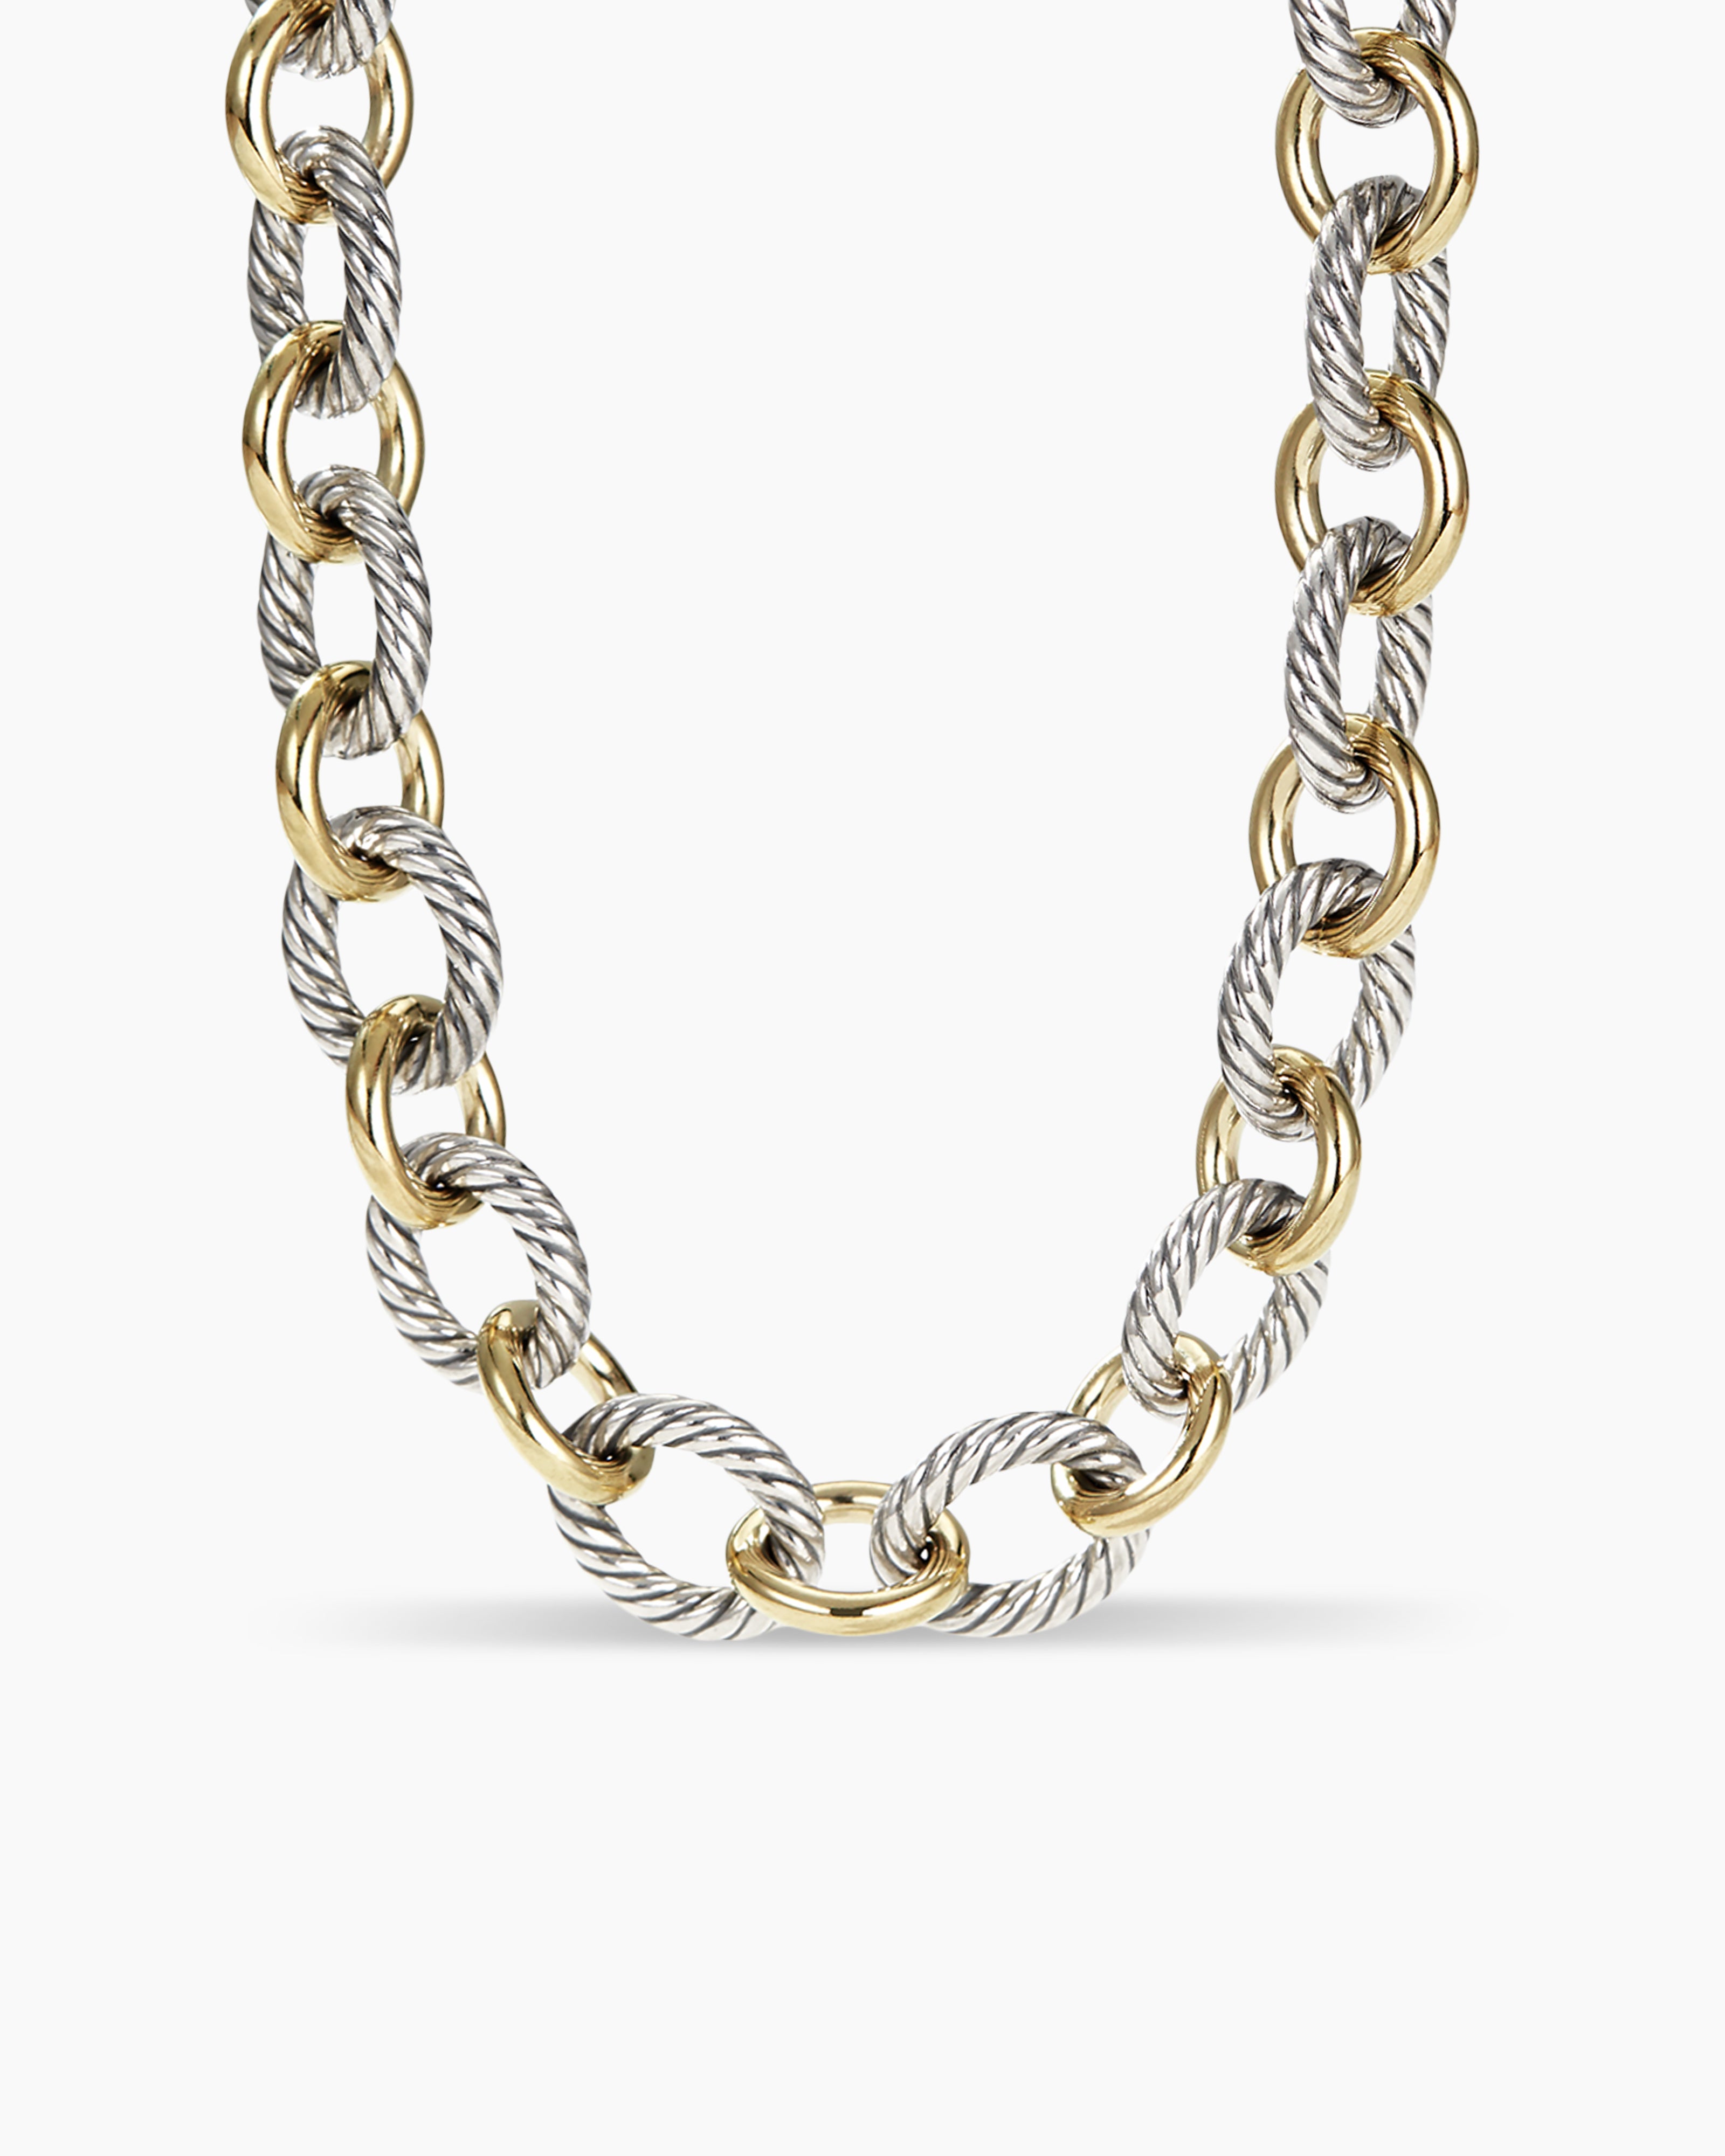 Gabriel & Co. 925 Sterling Silver Oval Link Chain Necklace with Bujukan  Stations | Skeie's Jewelers